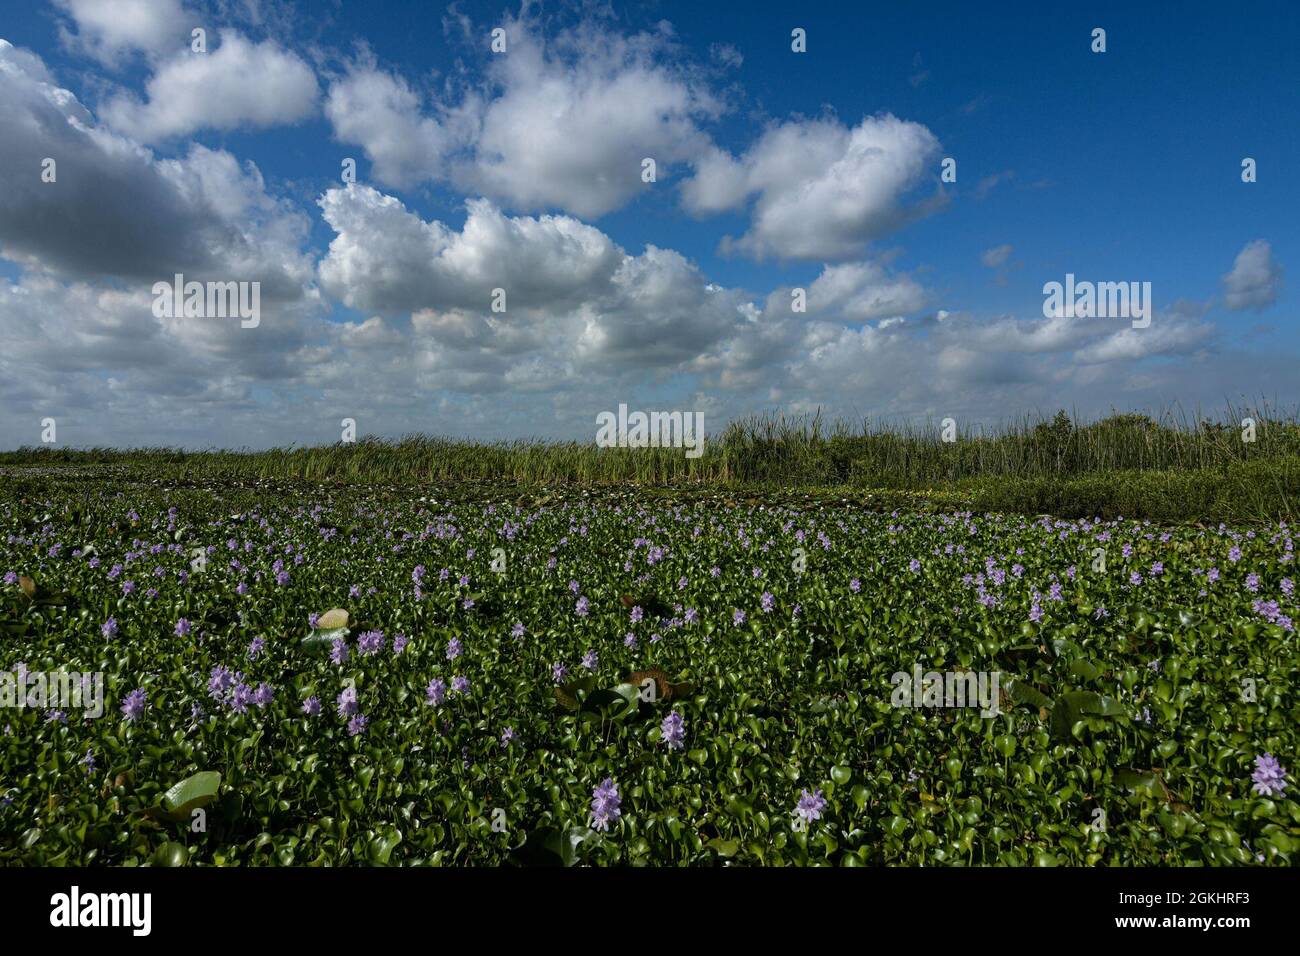 Non-native and the invasive water hyacinth outcompetes native aquatic plants on Lake Okeechobee, Fl. The water hyacinth is an aquatic invasive species that was introduced to the United States from South America over 100 years ago at the World’s Fair. It is a major detriment to flood risk management infrastructure. The Jacksonville District Invasive Species Management Branch utilizes Integrated Pest Management (IPM) to manage invasive species. IPM is the coordinated use of the most appropriate strategy to prevent or reduce unacceptable levels of invasive species and their damage by the most eco Stock Photo